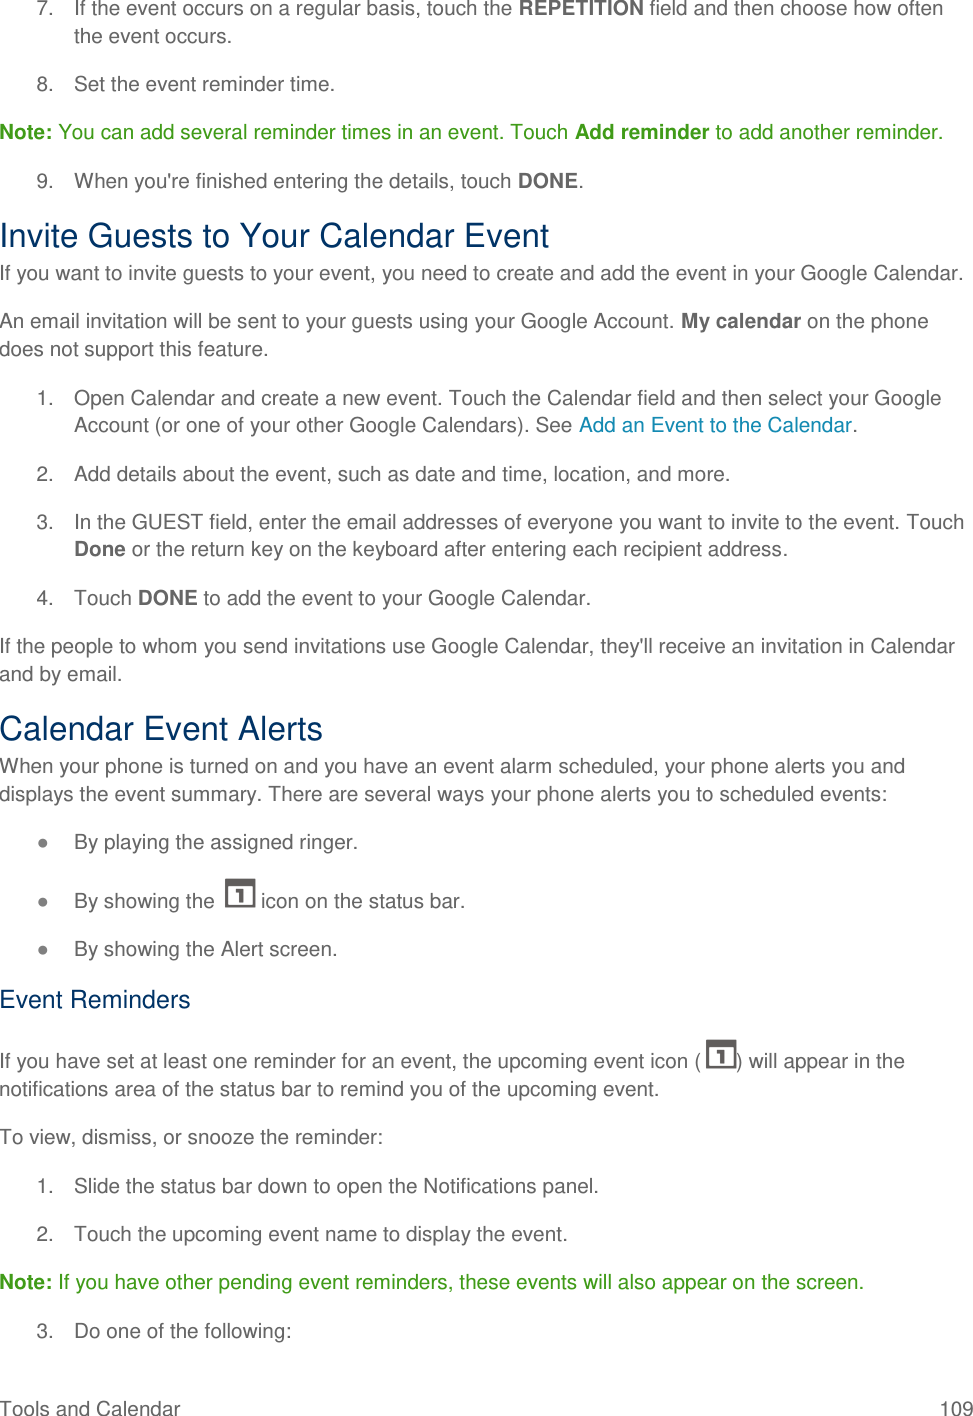 Tools and Calendar  109 7.  If the event occurs on a regular basis, touch the REPETITION field and then choose how often the event occurs. 8.  Set the event reminder time. Note: You can add several reminder times in an event. Touch Add reminder to add another reminder. 9.  When you&apos;re finished entering the details, touch DONE. Invite Guests to Your Calendar Event If you want to invite guests to your event, you need to create and add the event in your Google Calendar. An email invitation will be sent to your guests using your Google Account. My calendar on the phone does not support this feature. 1.  Open Calendar and create a new event. Touch the Calendar field and then select your Google Account (or one of your other Google Calendars). See Add an Event to the Calendar. 2.  Add details about the event, such as date and time, location, and more. 3.  In the GUEST field, enter the email addresses of everyone you want to invite to the event. Touch Done or the return key on the keyboard after entering each recipient address. 4.  Touch DONE to add the event to your Google Calendar. If the people to whom you send invitations use Google Calendar, they&apos;ll receive an invitation in Calendar and by email. Calendar Event Alerts When your phone is turned on and you have an event alarm scheduled, your phone alerts you and displays the event summary. There are several ways your phone alerts you to scheduled events: ● By playing the assigned ringer. ● By showing the   icon on the status bar. ● By showing the Alert screen. Event Reminders If you have set at least one reminder for an event, the upcoming event icon ( ) will appear in the notifications area of the status bar to remind you of the upcoming event. To view, dismiss, or snooze the reminder: 1.  Slide the status bar down to open the Notifications panel. 2.  Touch the upcoming event name to display the event. Note: If you have other pending event reminders, these events will also appear on the screen. 3.  Do one of the following: 